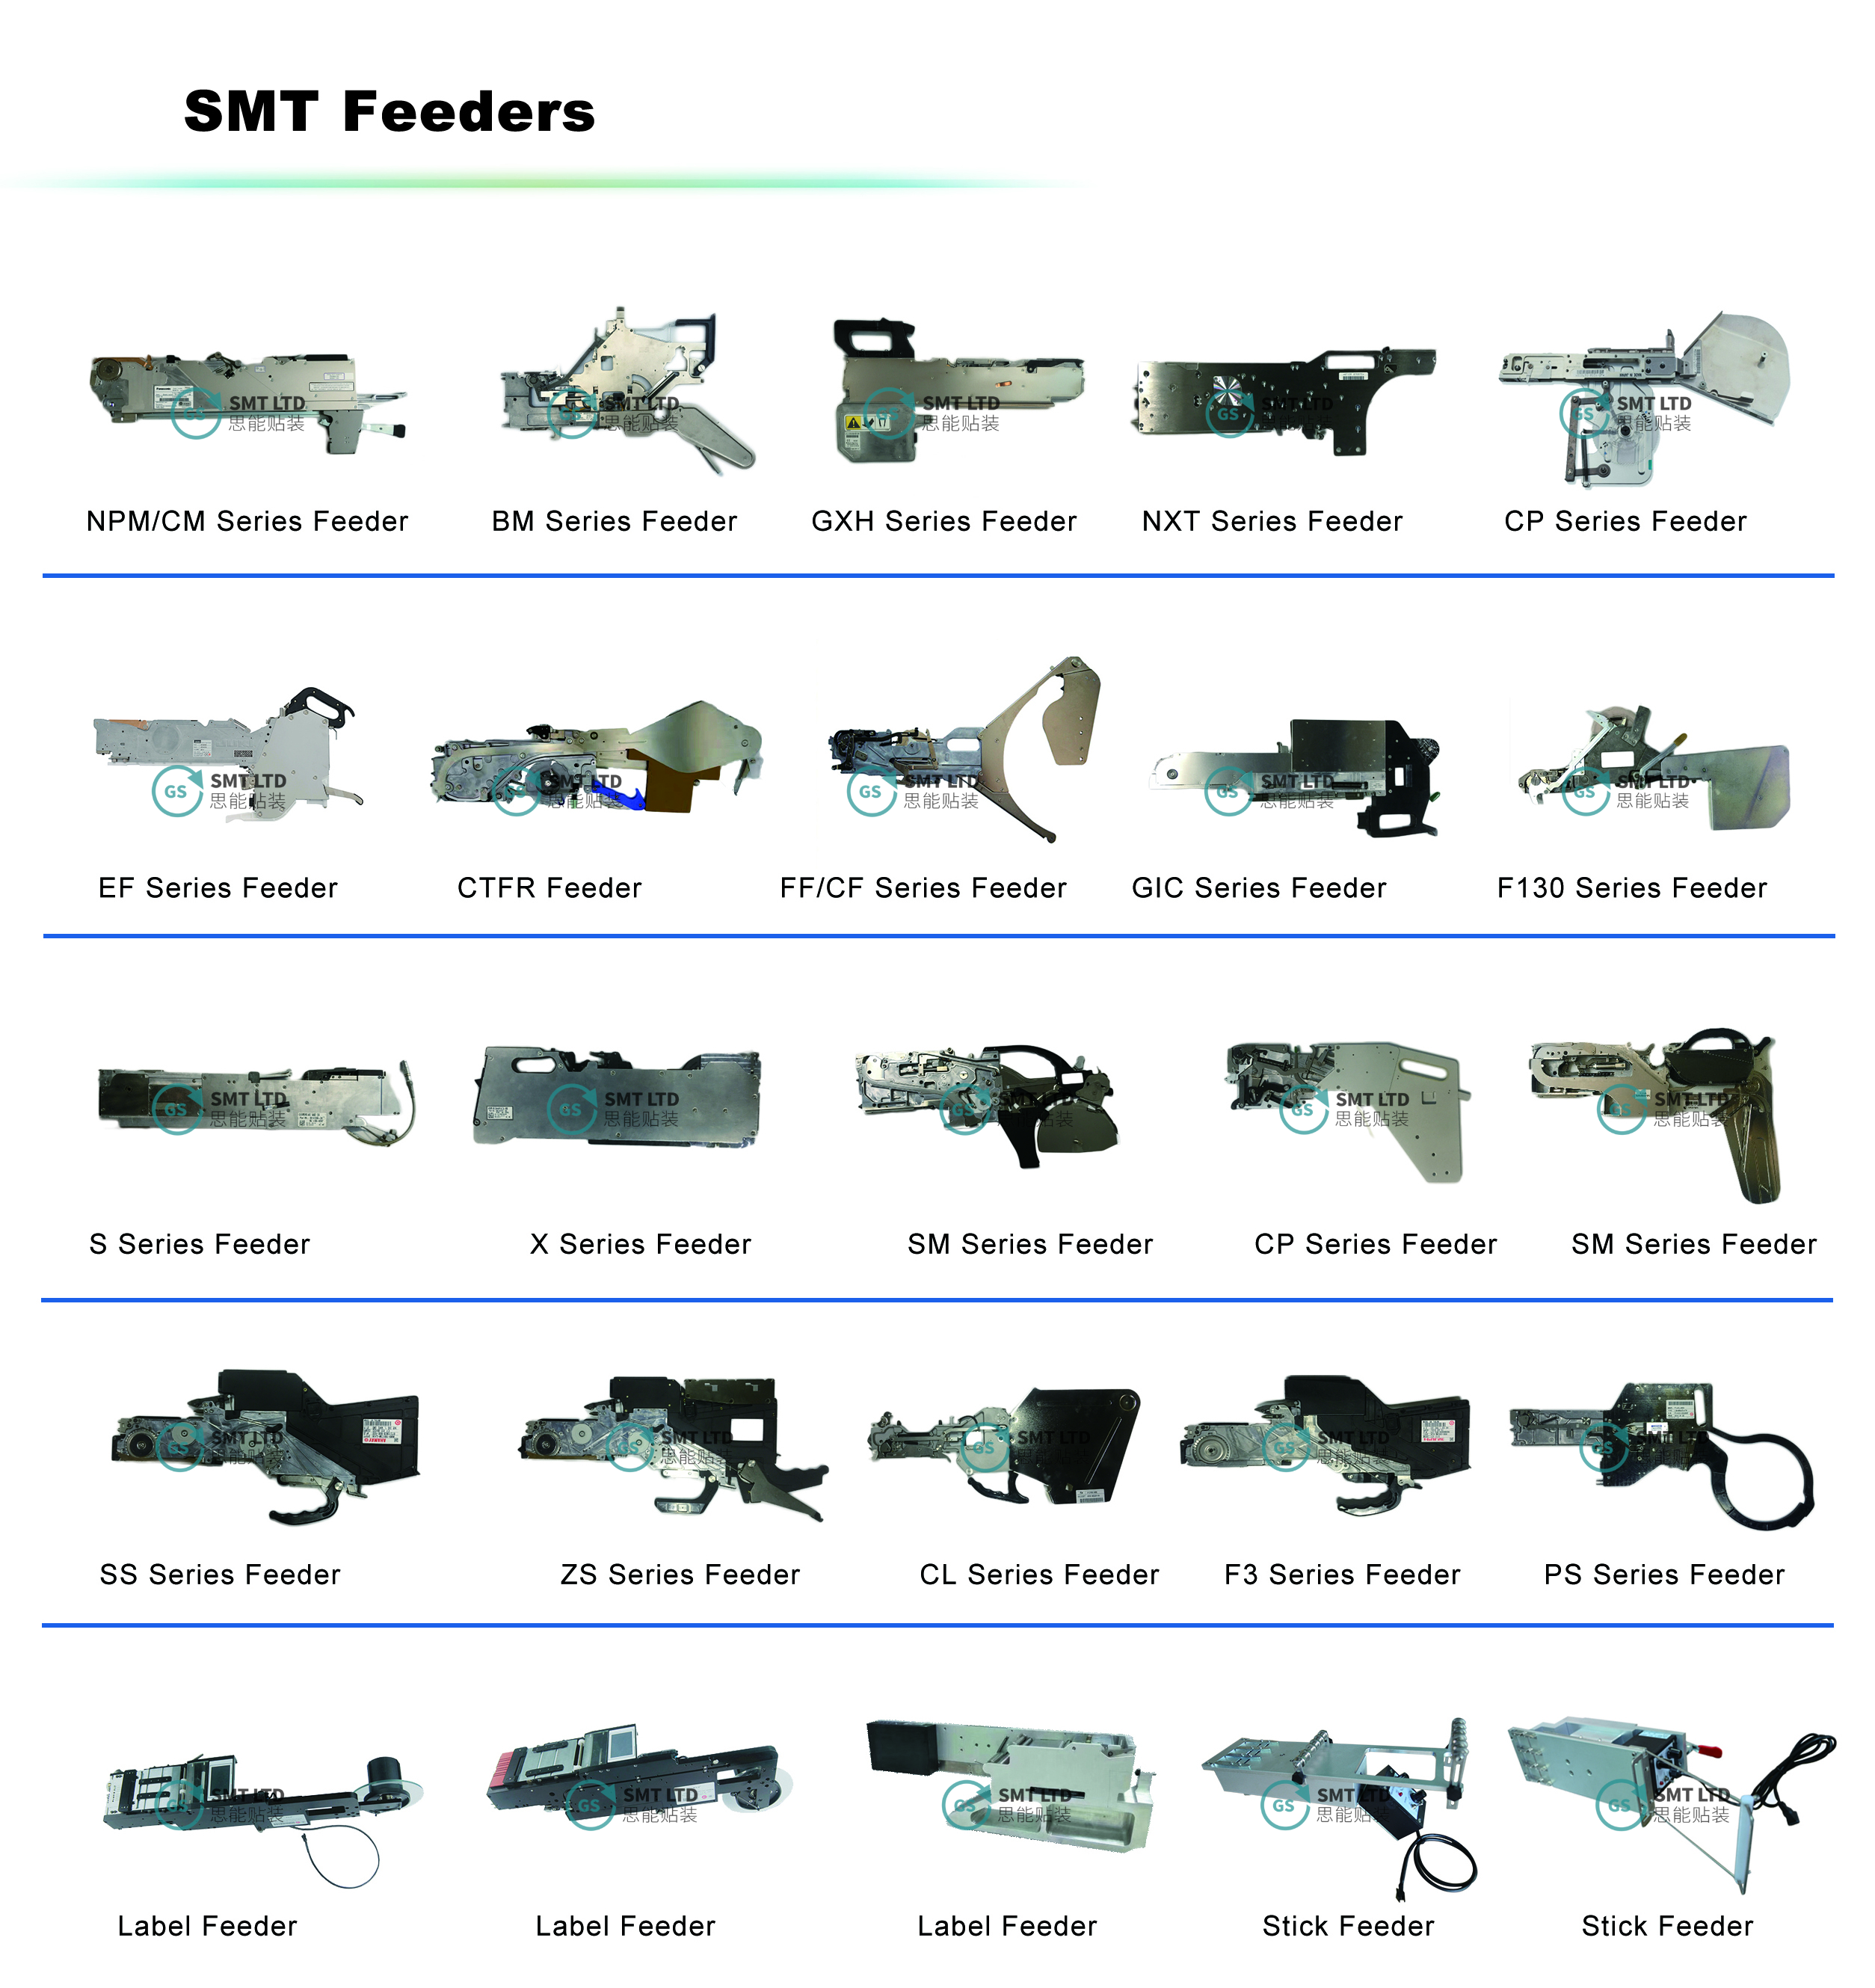 Advancements in Surface Mount Technology (SMT) feeder technology